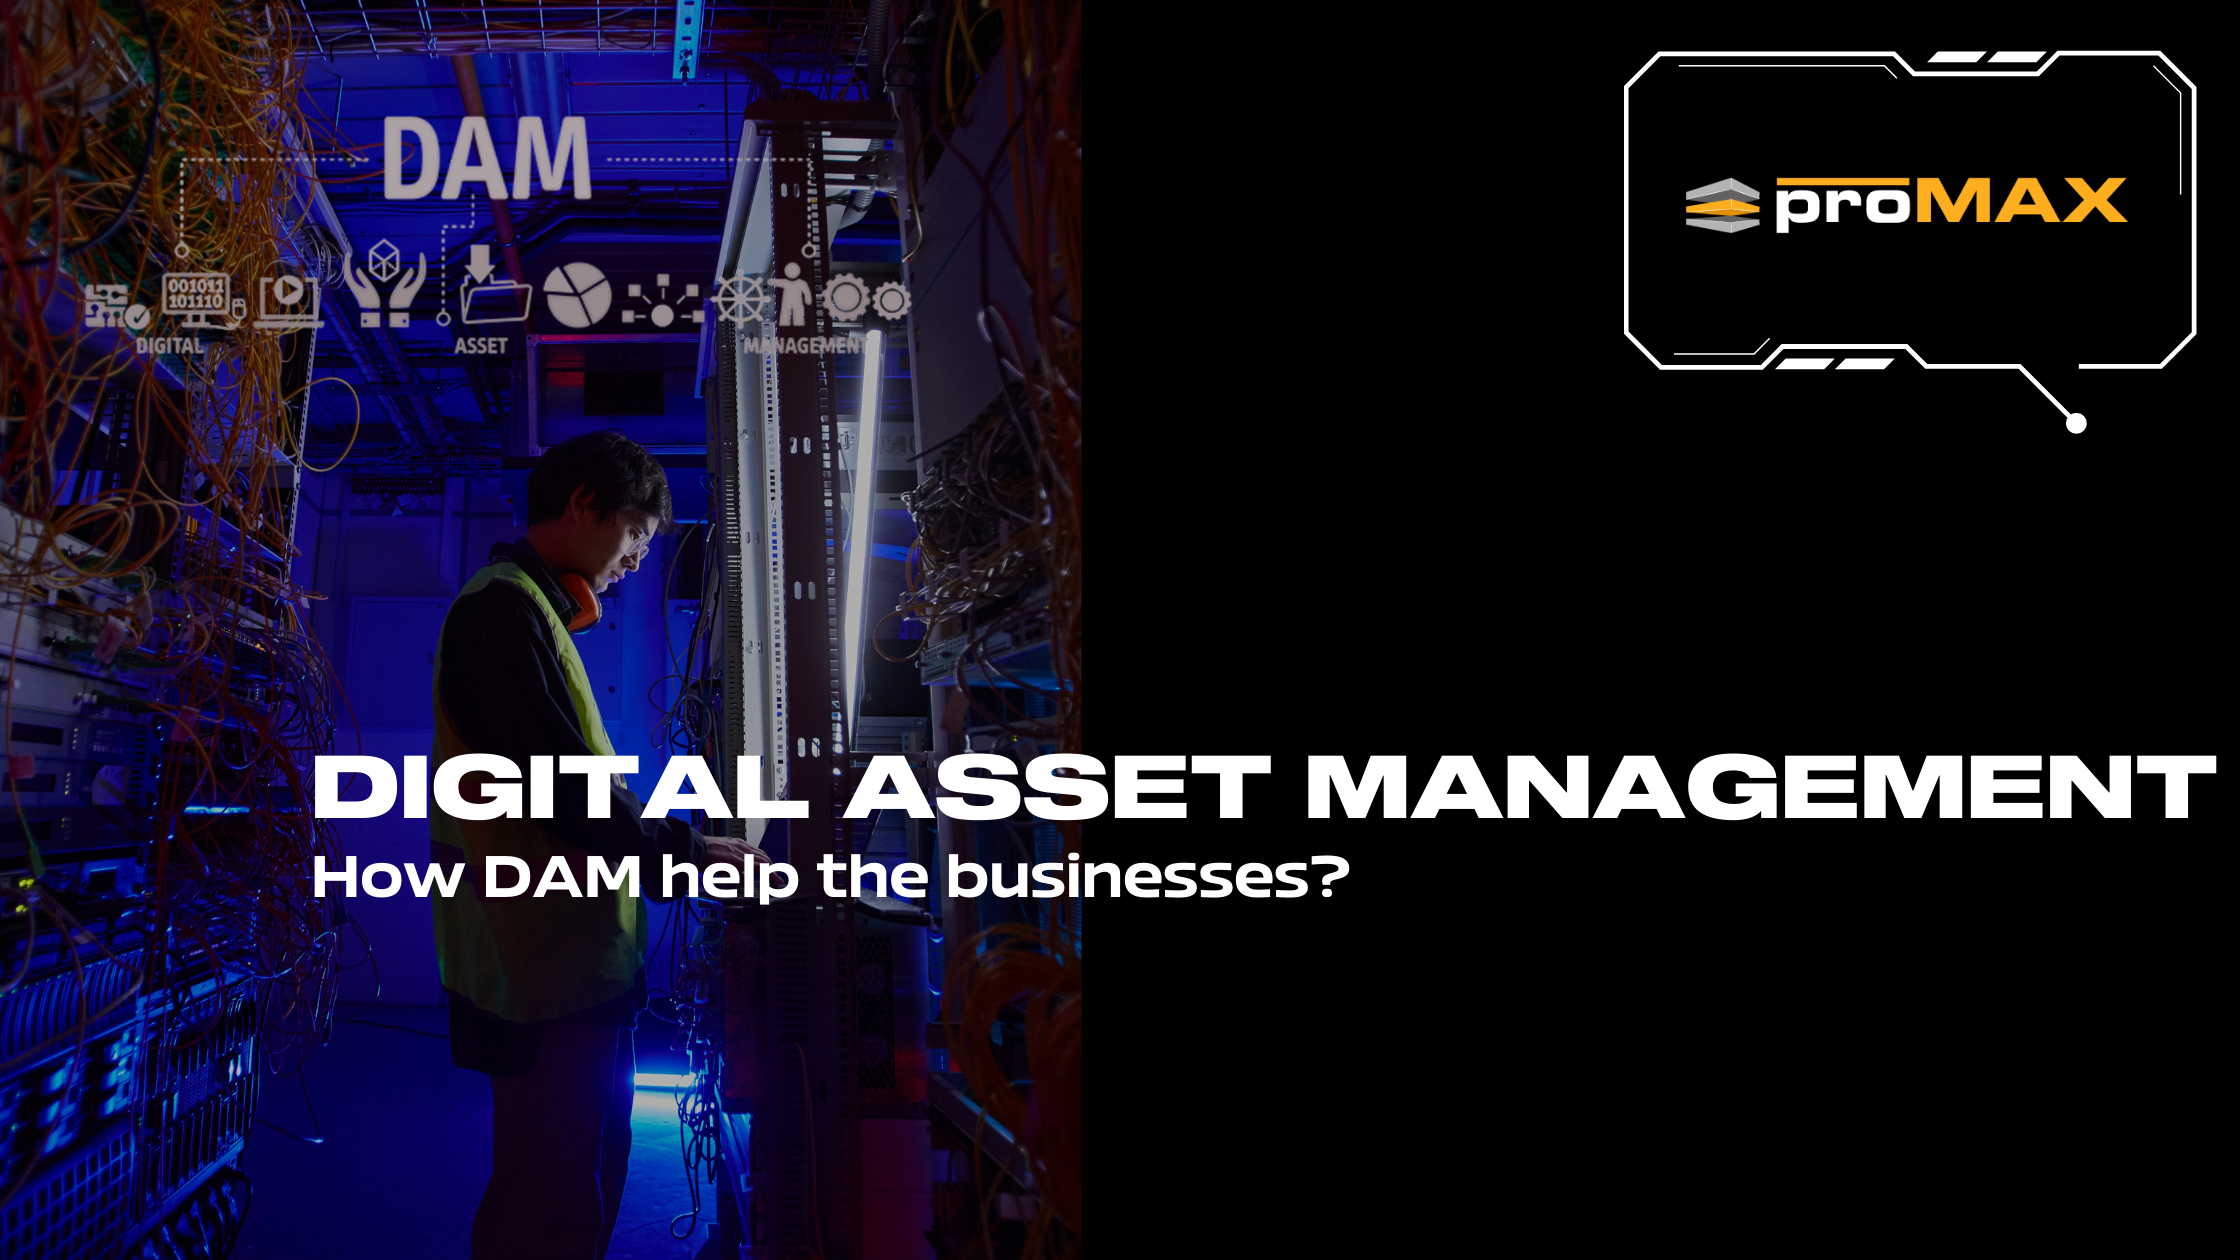 How Digital Asset Management is Helping Businesses Worldwide